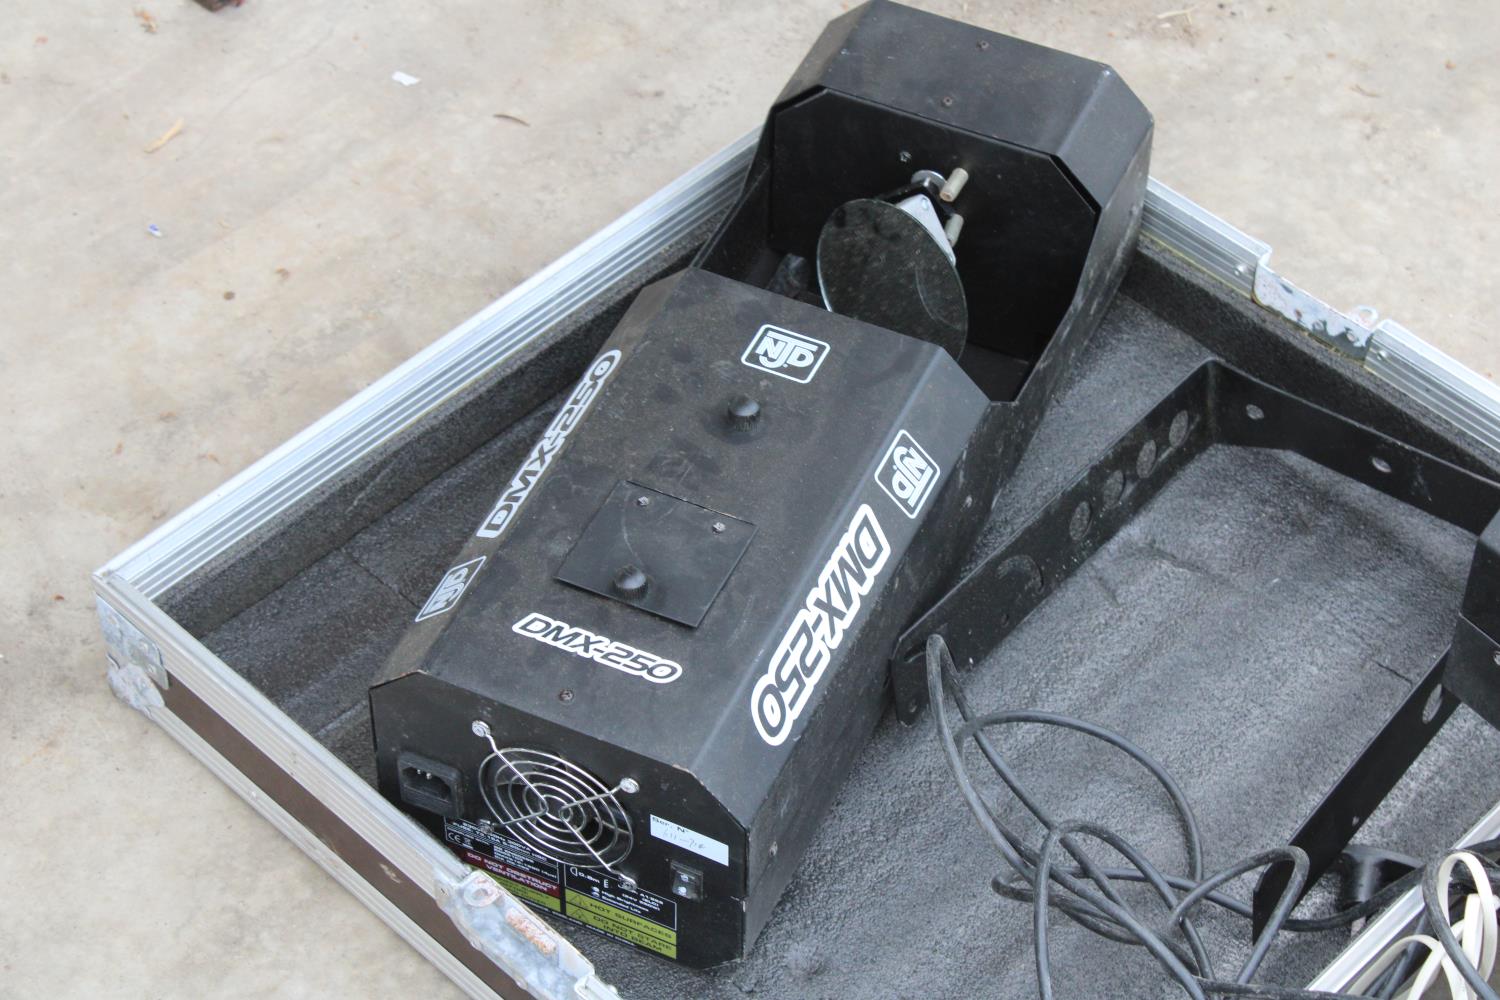 A FLIGHT CASE CONTAINING A PAIR OF NJD DMX 250 STAGE LIGHTS AND ACCESSORIES - Image 4 of 8